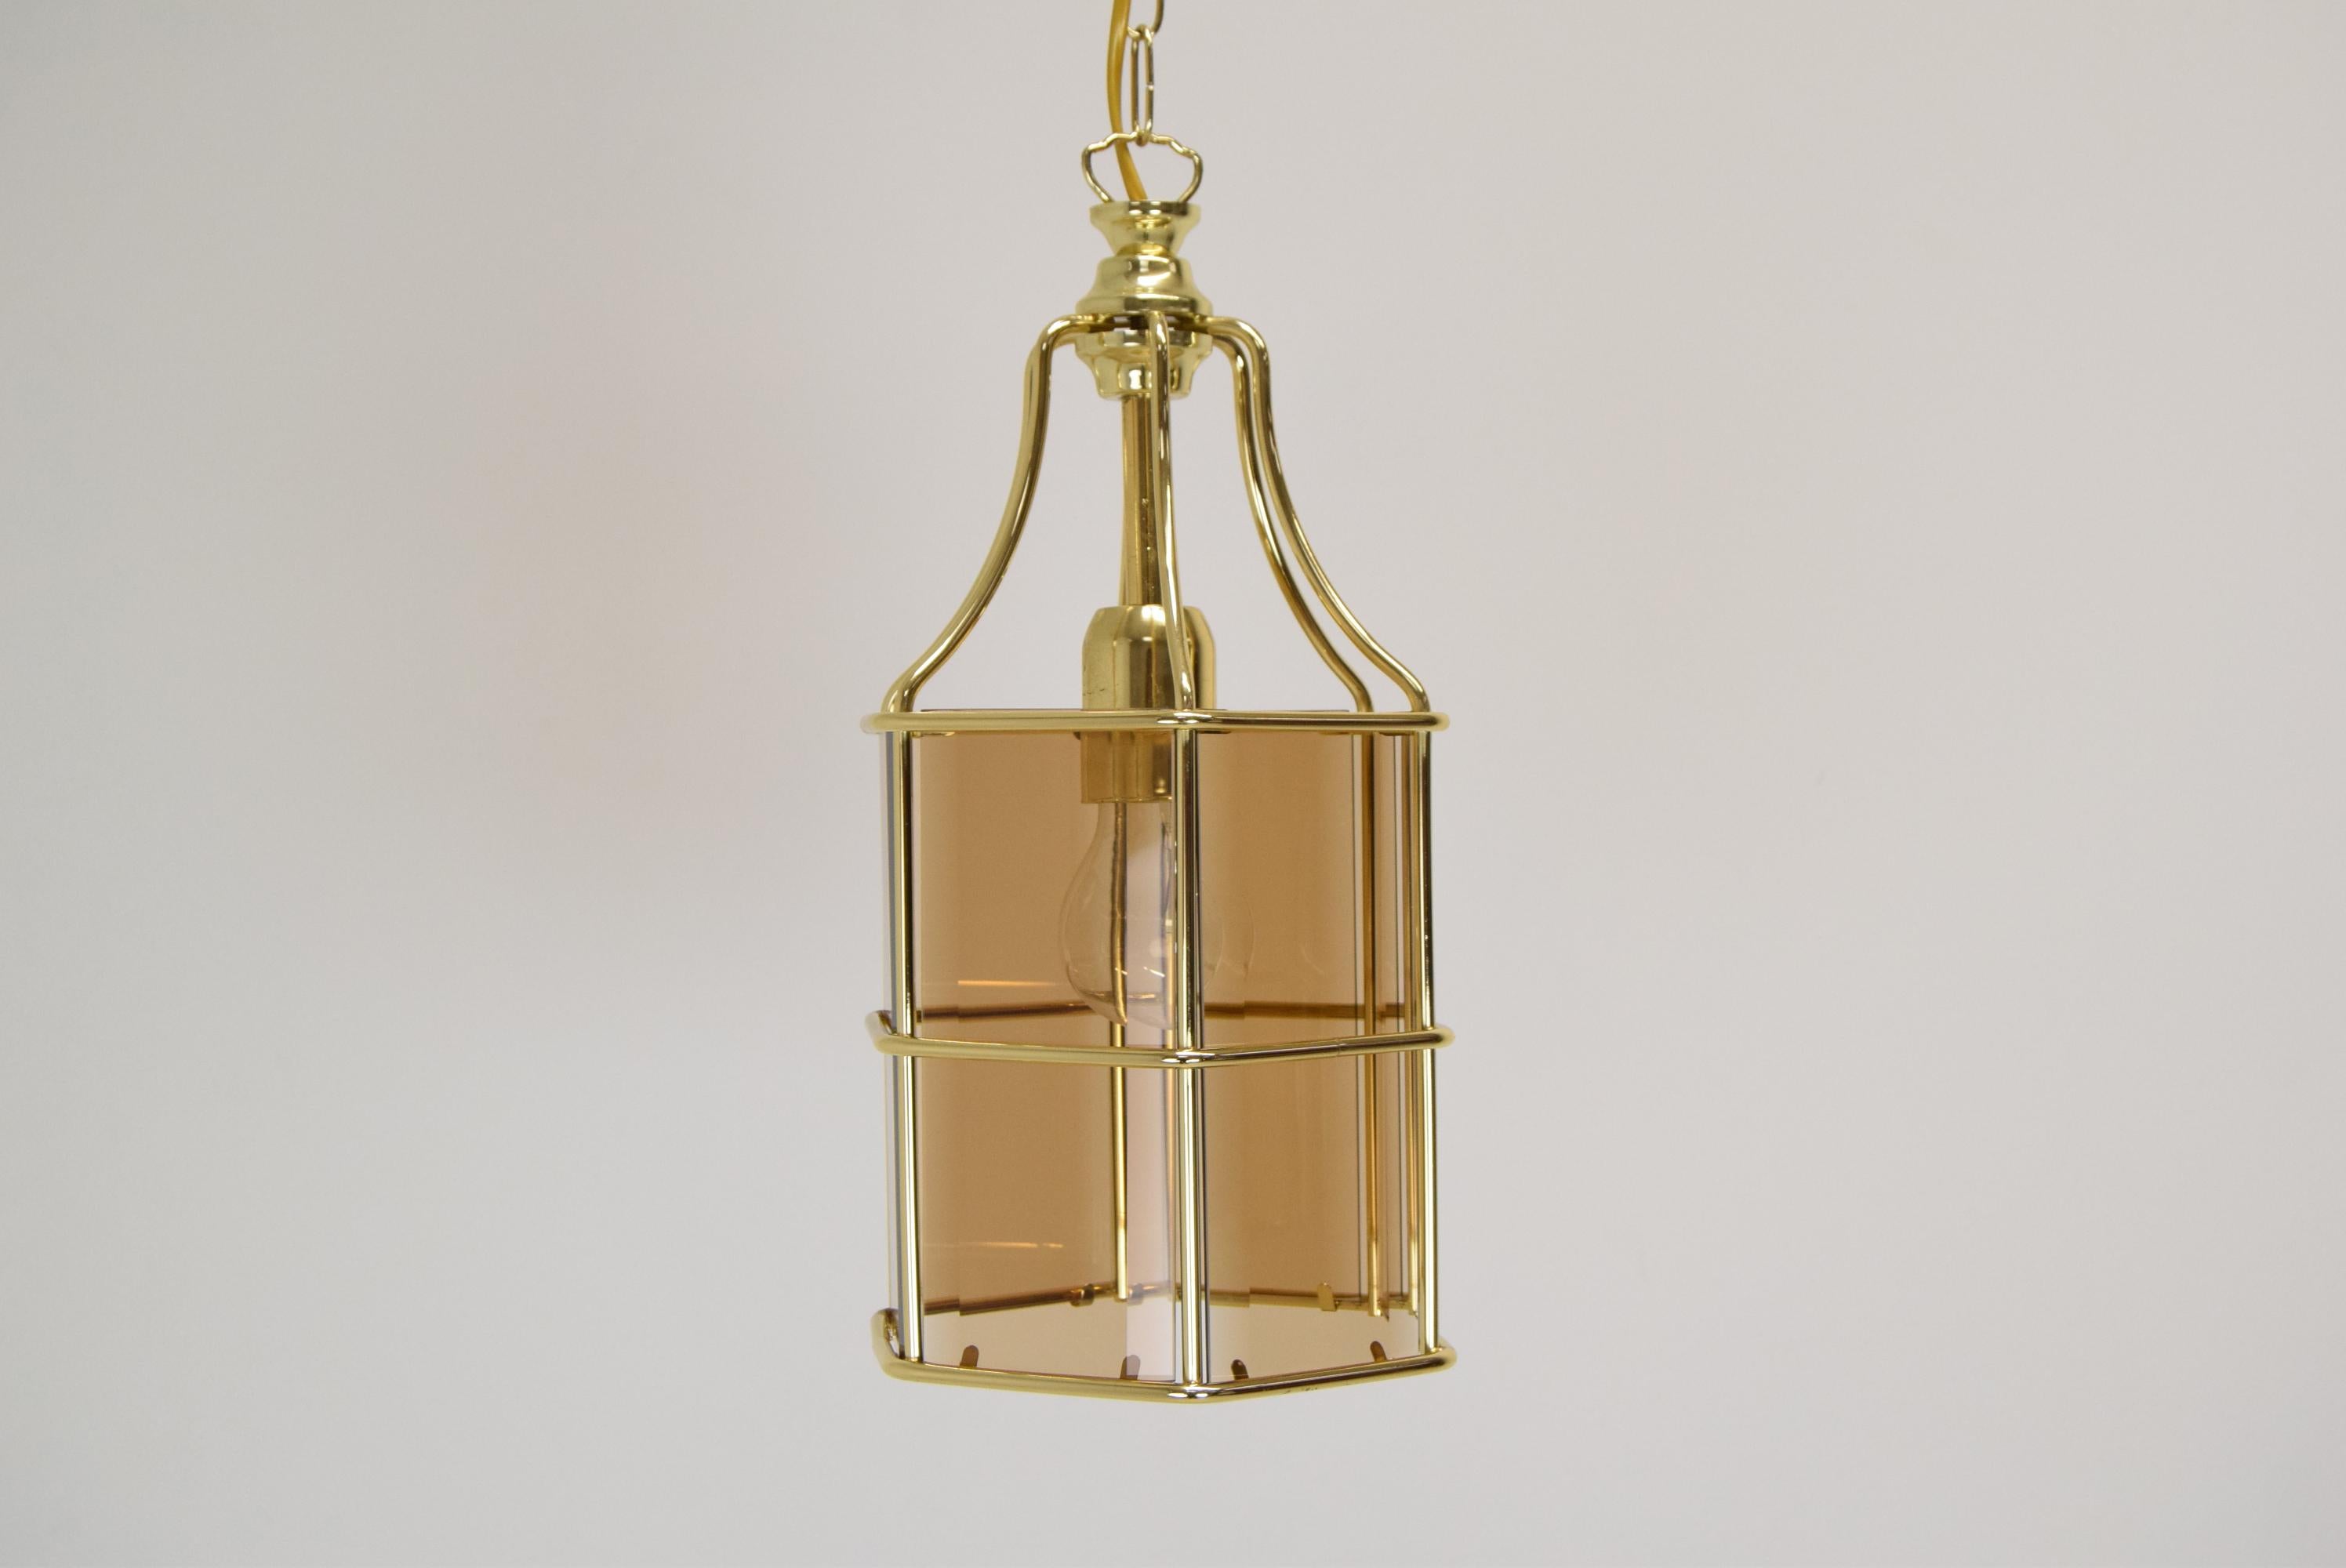 Made in Czechoslovakia
Made of smoked glass, Brass
1 x 60 W, E27 or E26bulb
US wiring compatible
Good original condition.